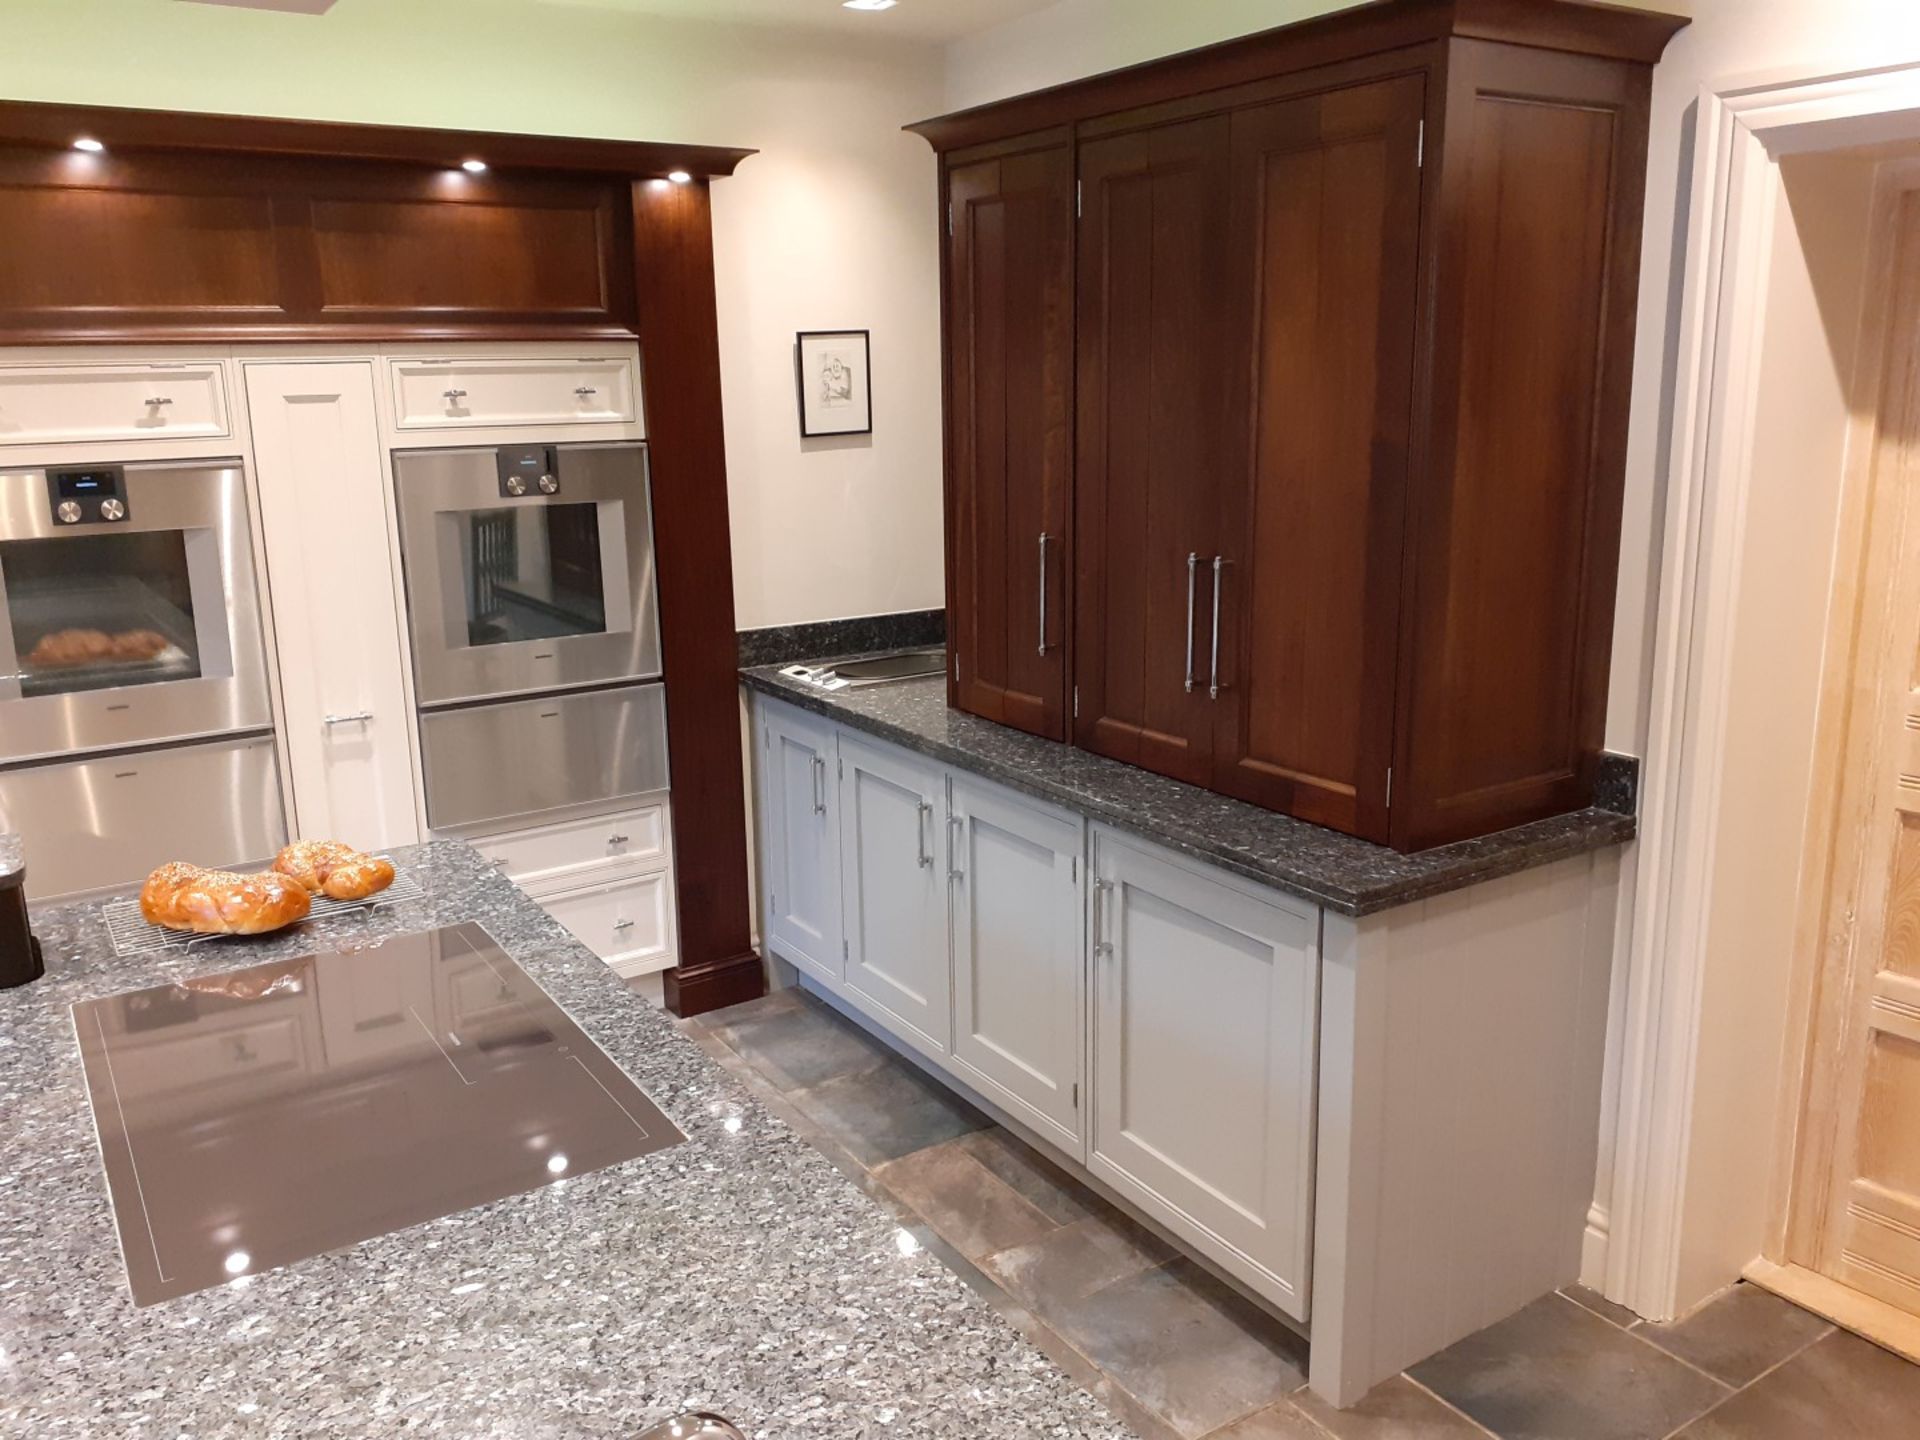 1 x Tom Howley Bespoke Solid Wood Kitchen Beautifully. Appointed With Granite Worktops - Image 51 of 138